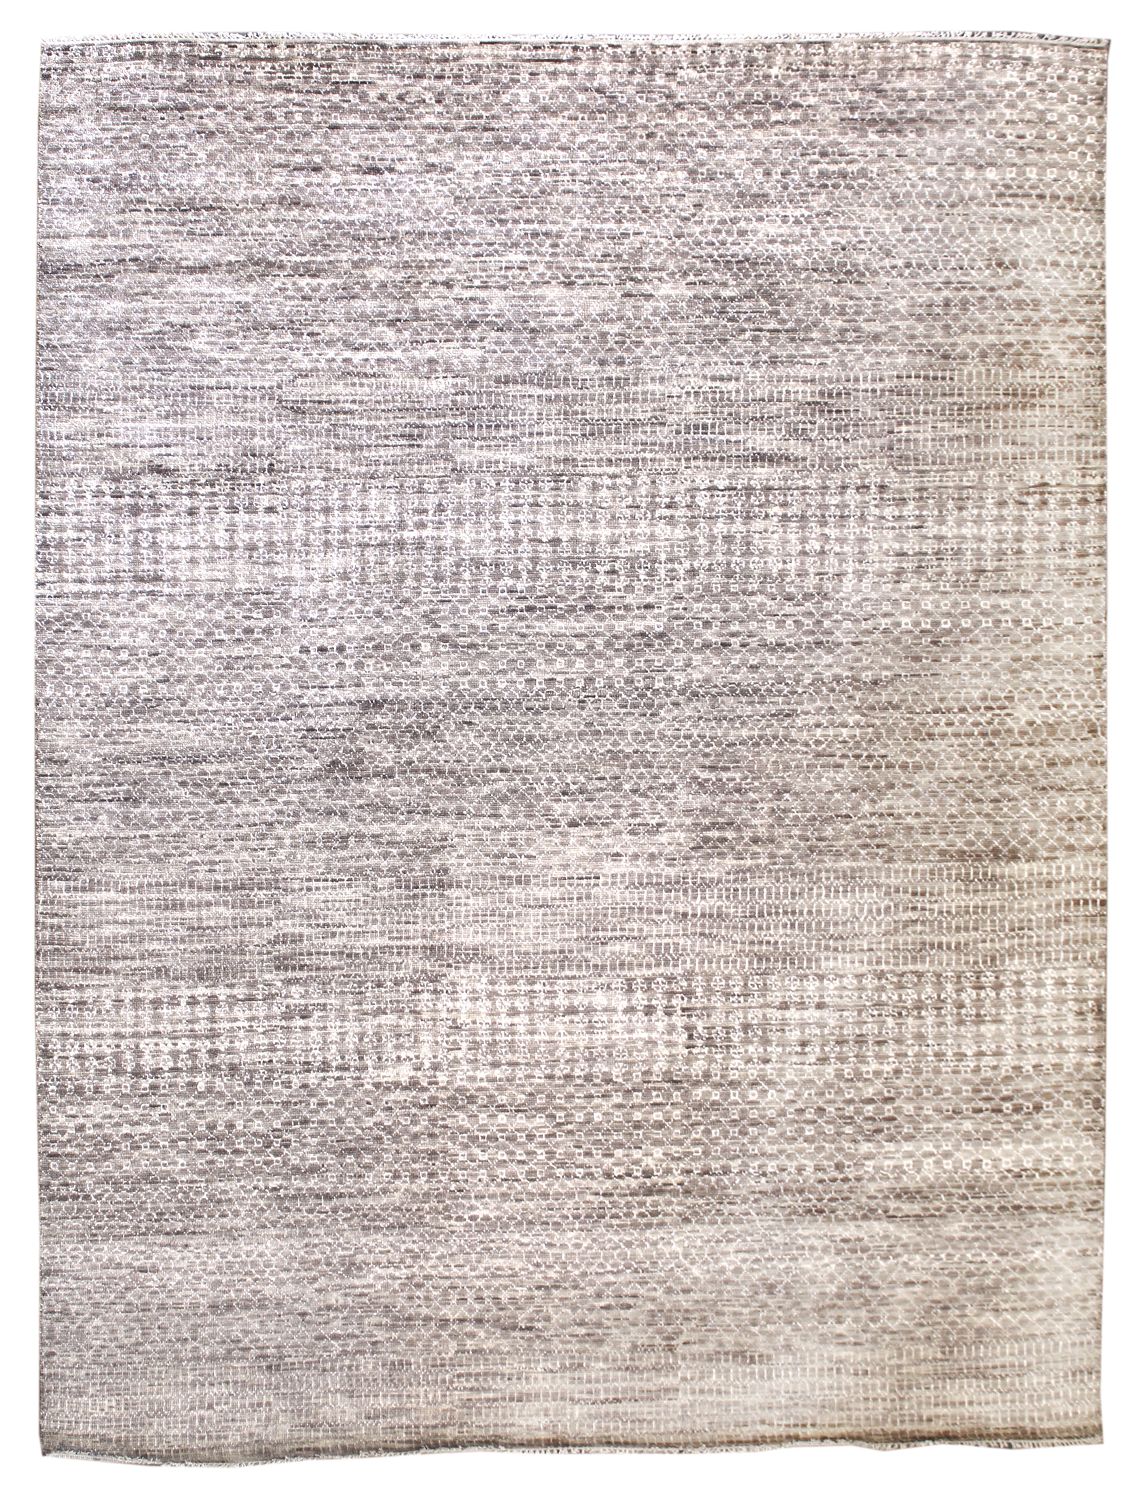 Illusions 2 Handwoven Contemporary Rug